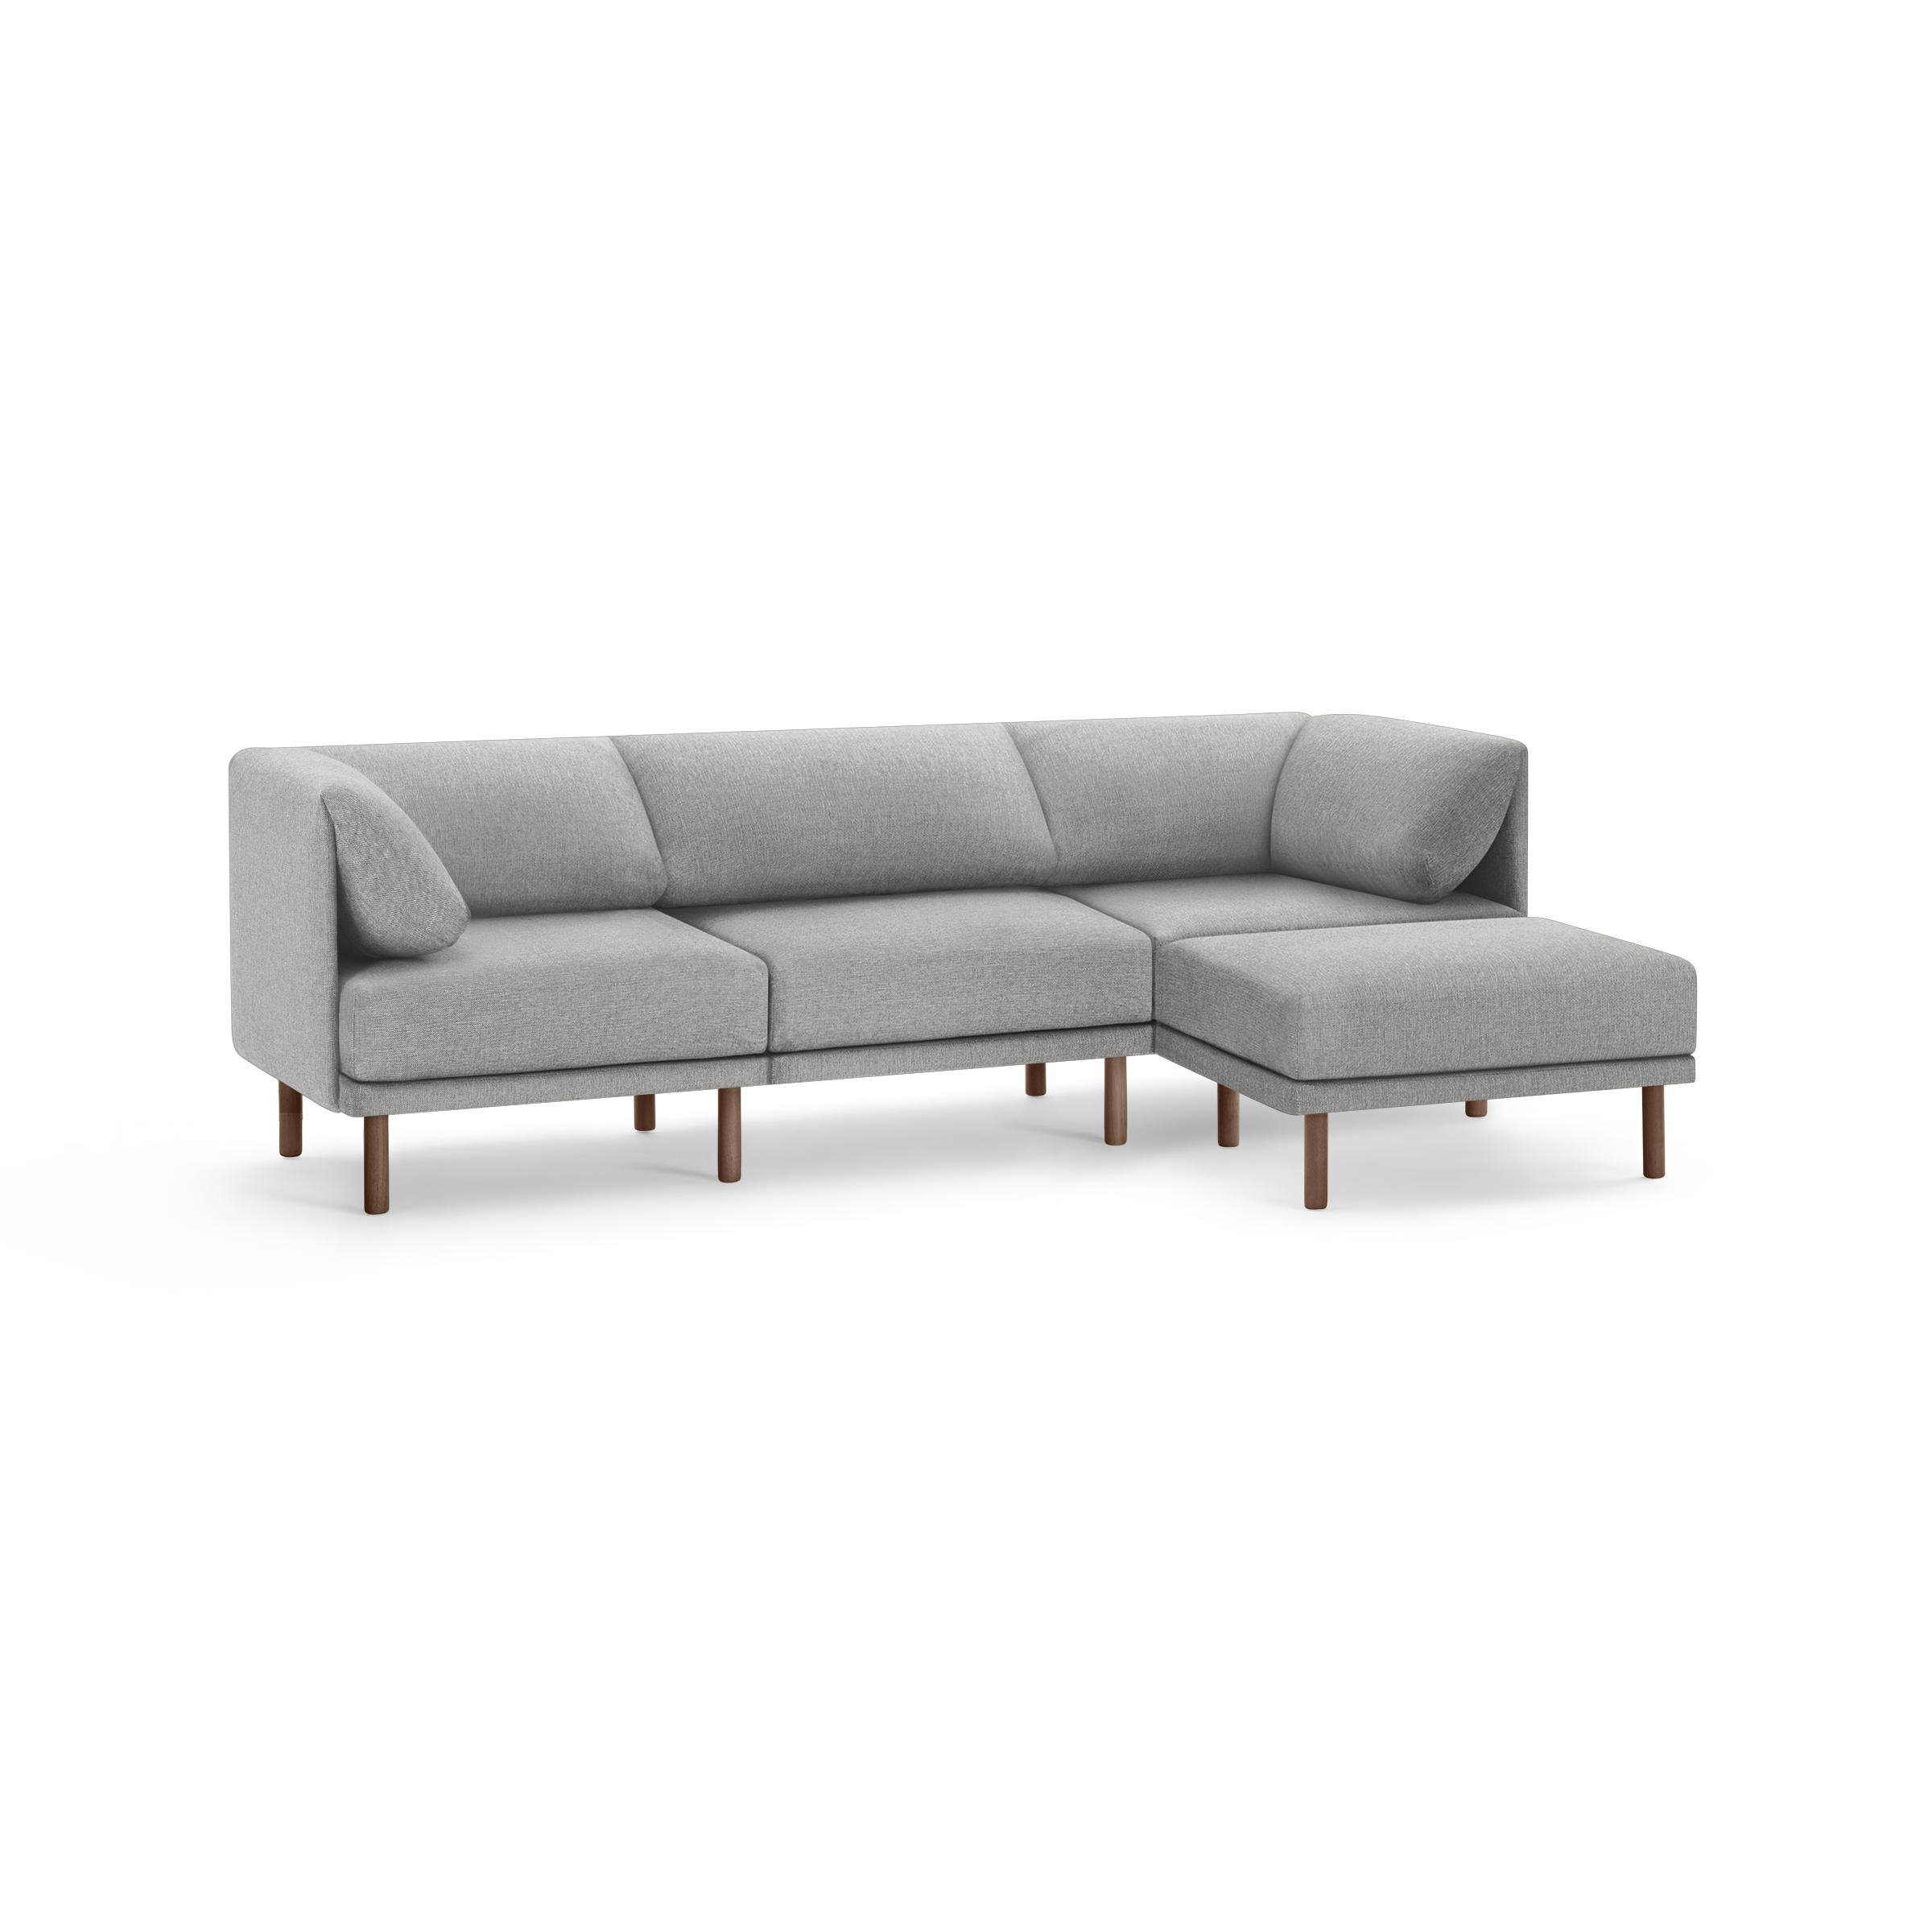 The Range 4-Piece Sectional Lounger in Stone Gray, Walnut Legs - Image 0